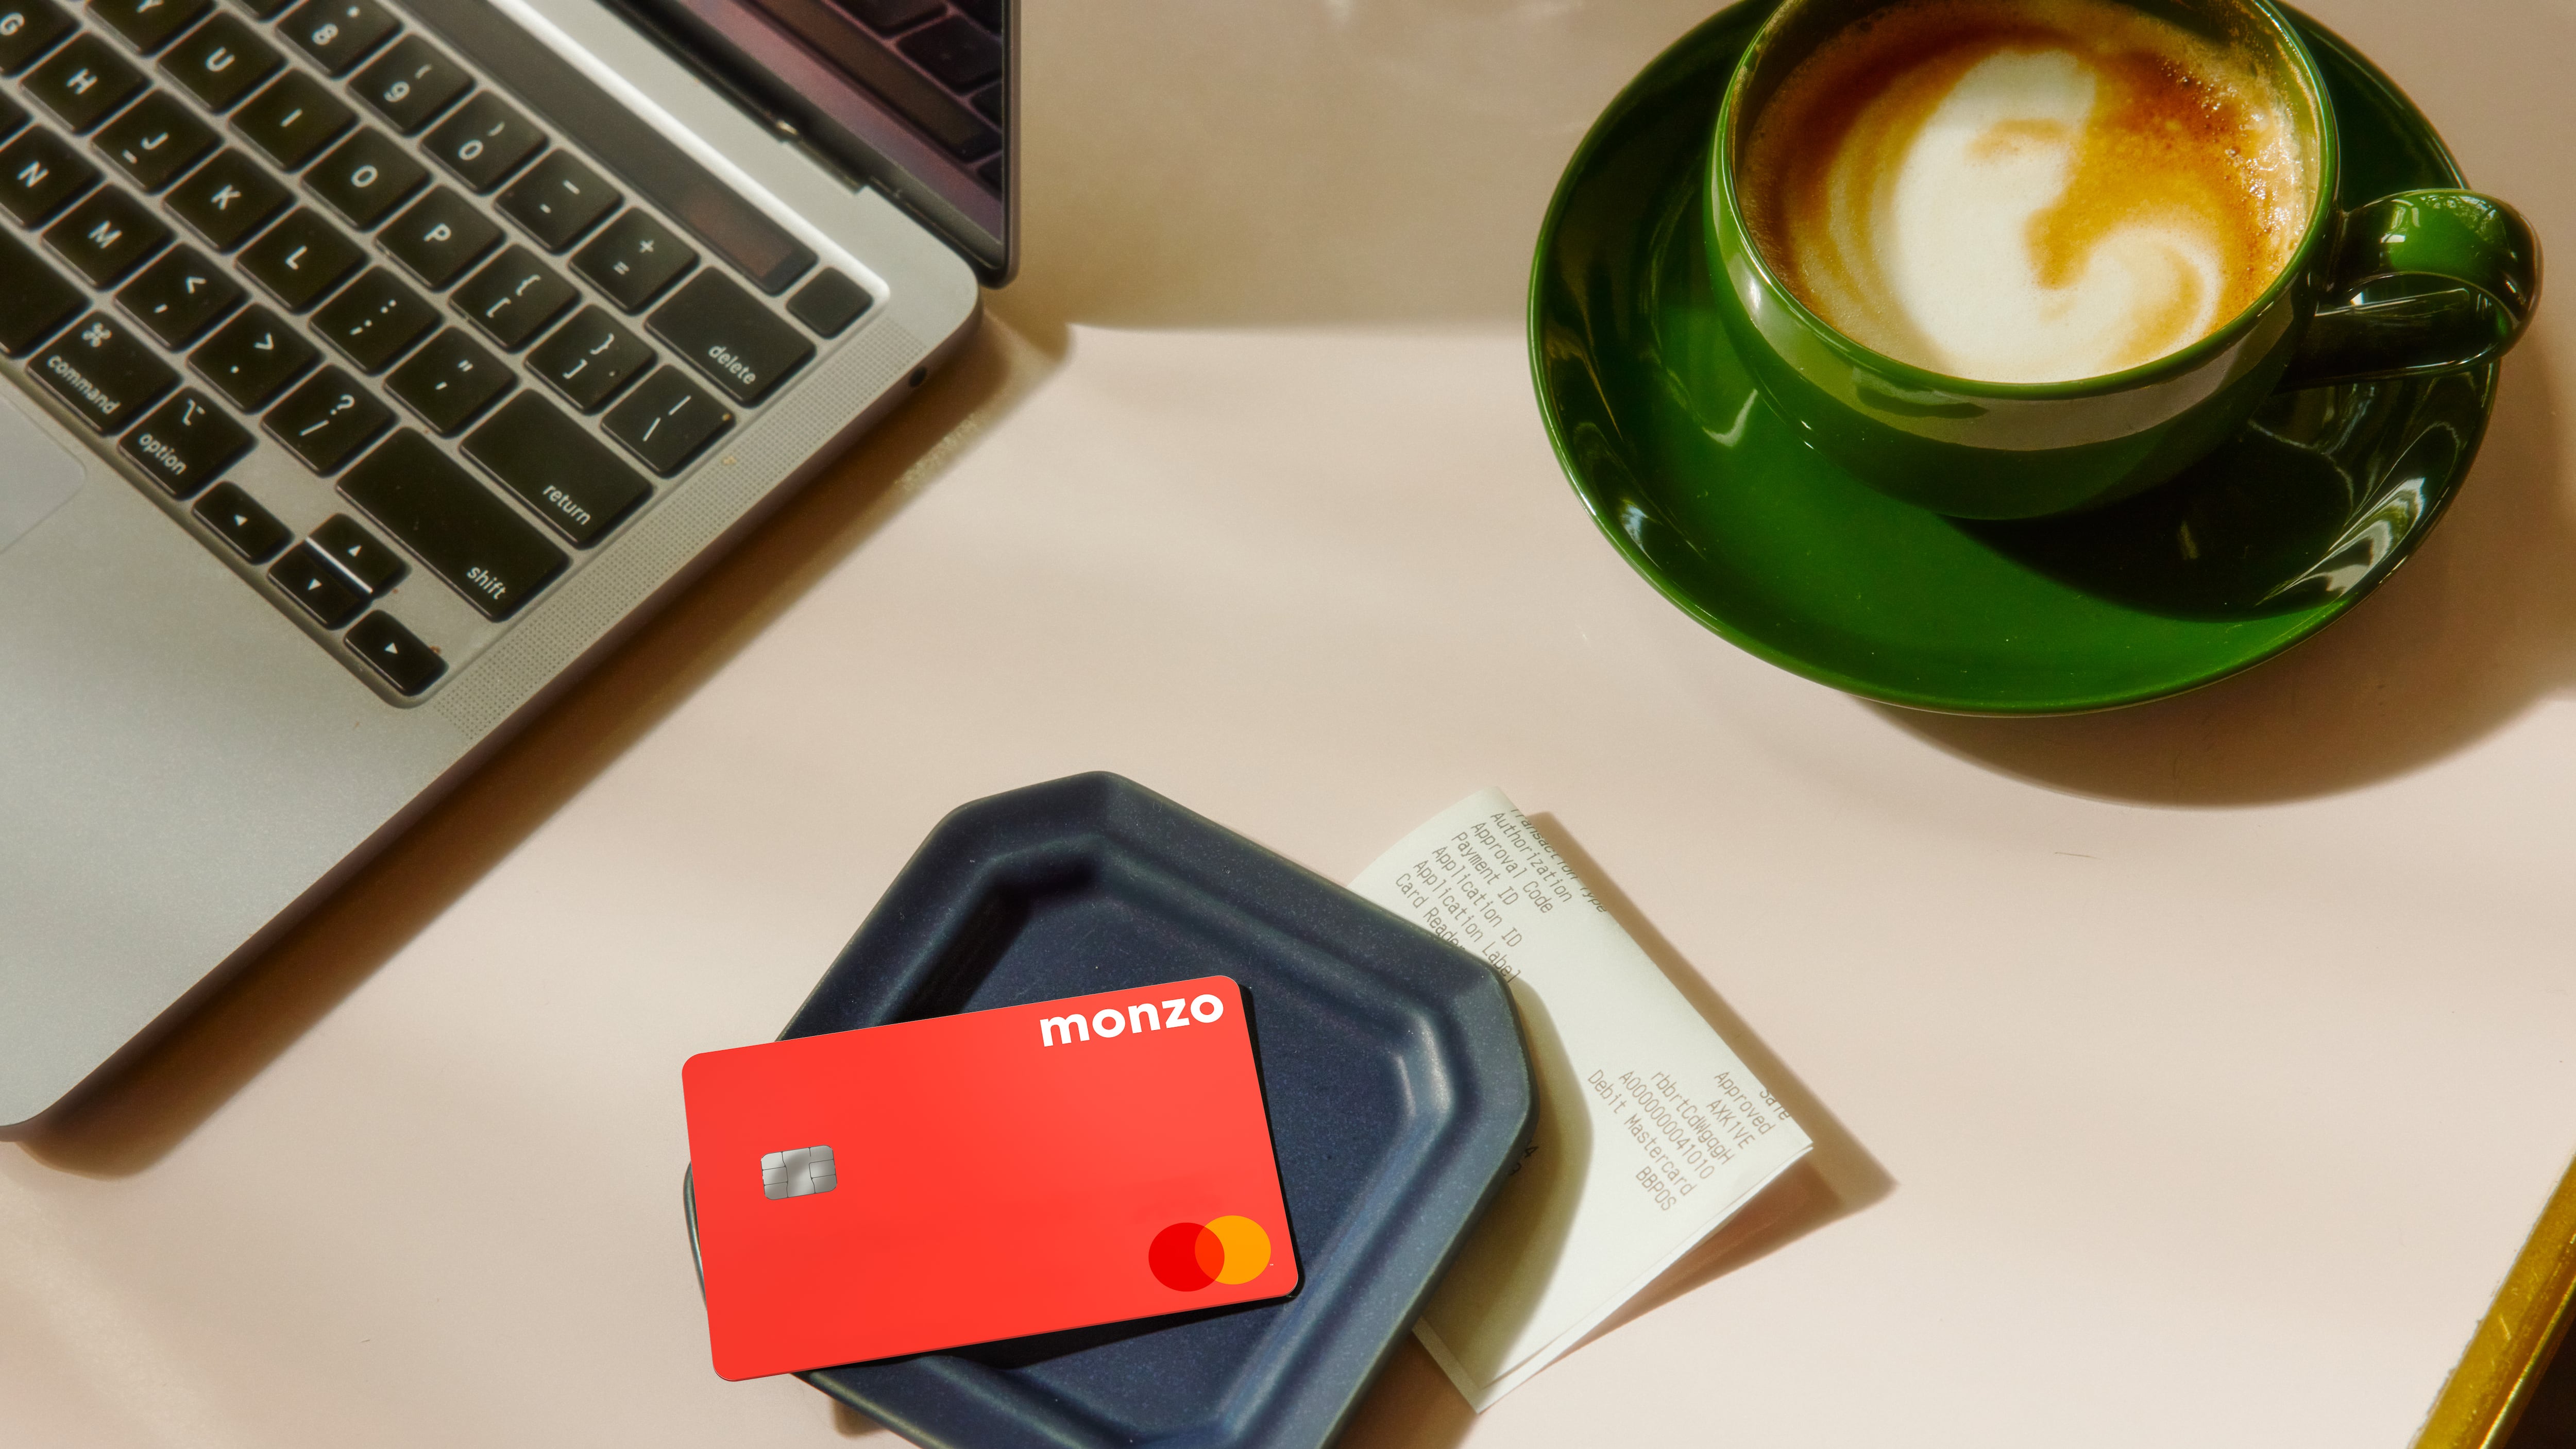 Monzo has unveiled new app-based features to help prevent fraud